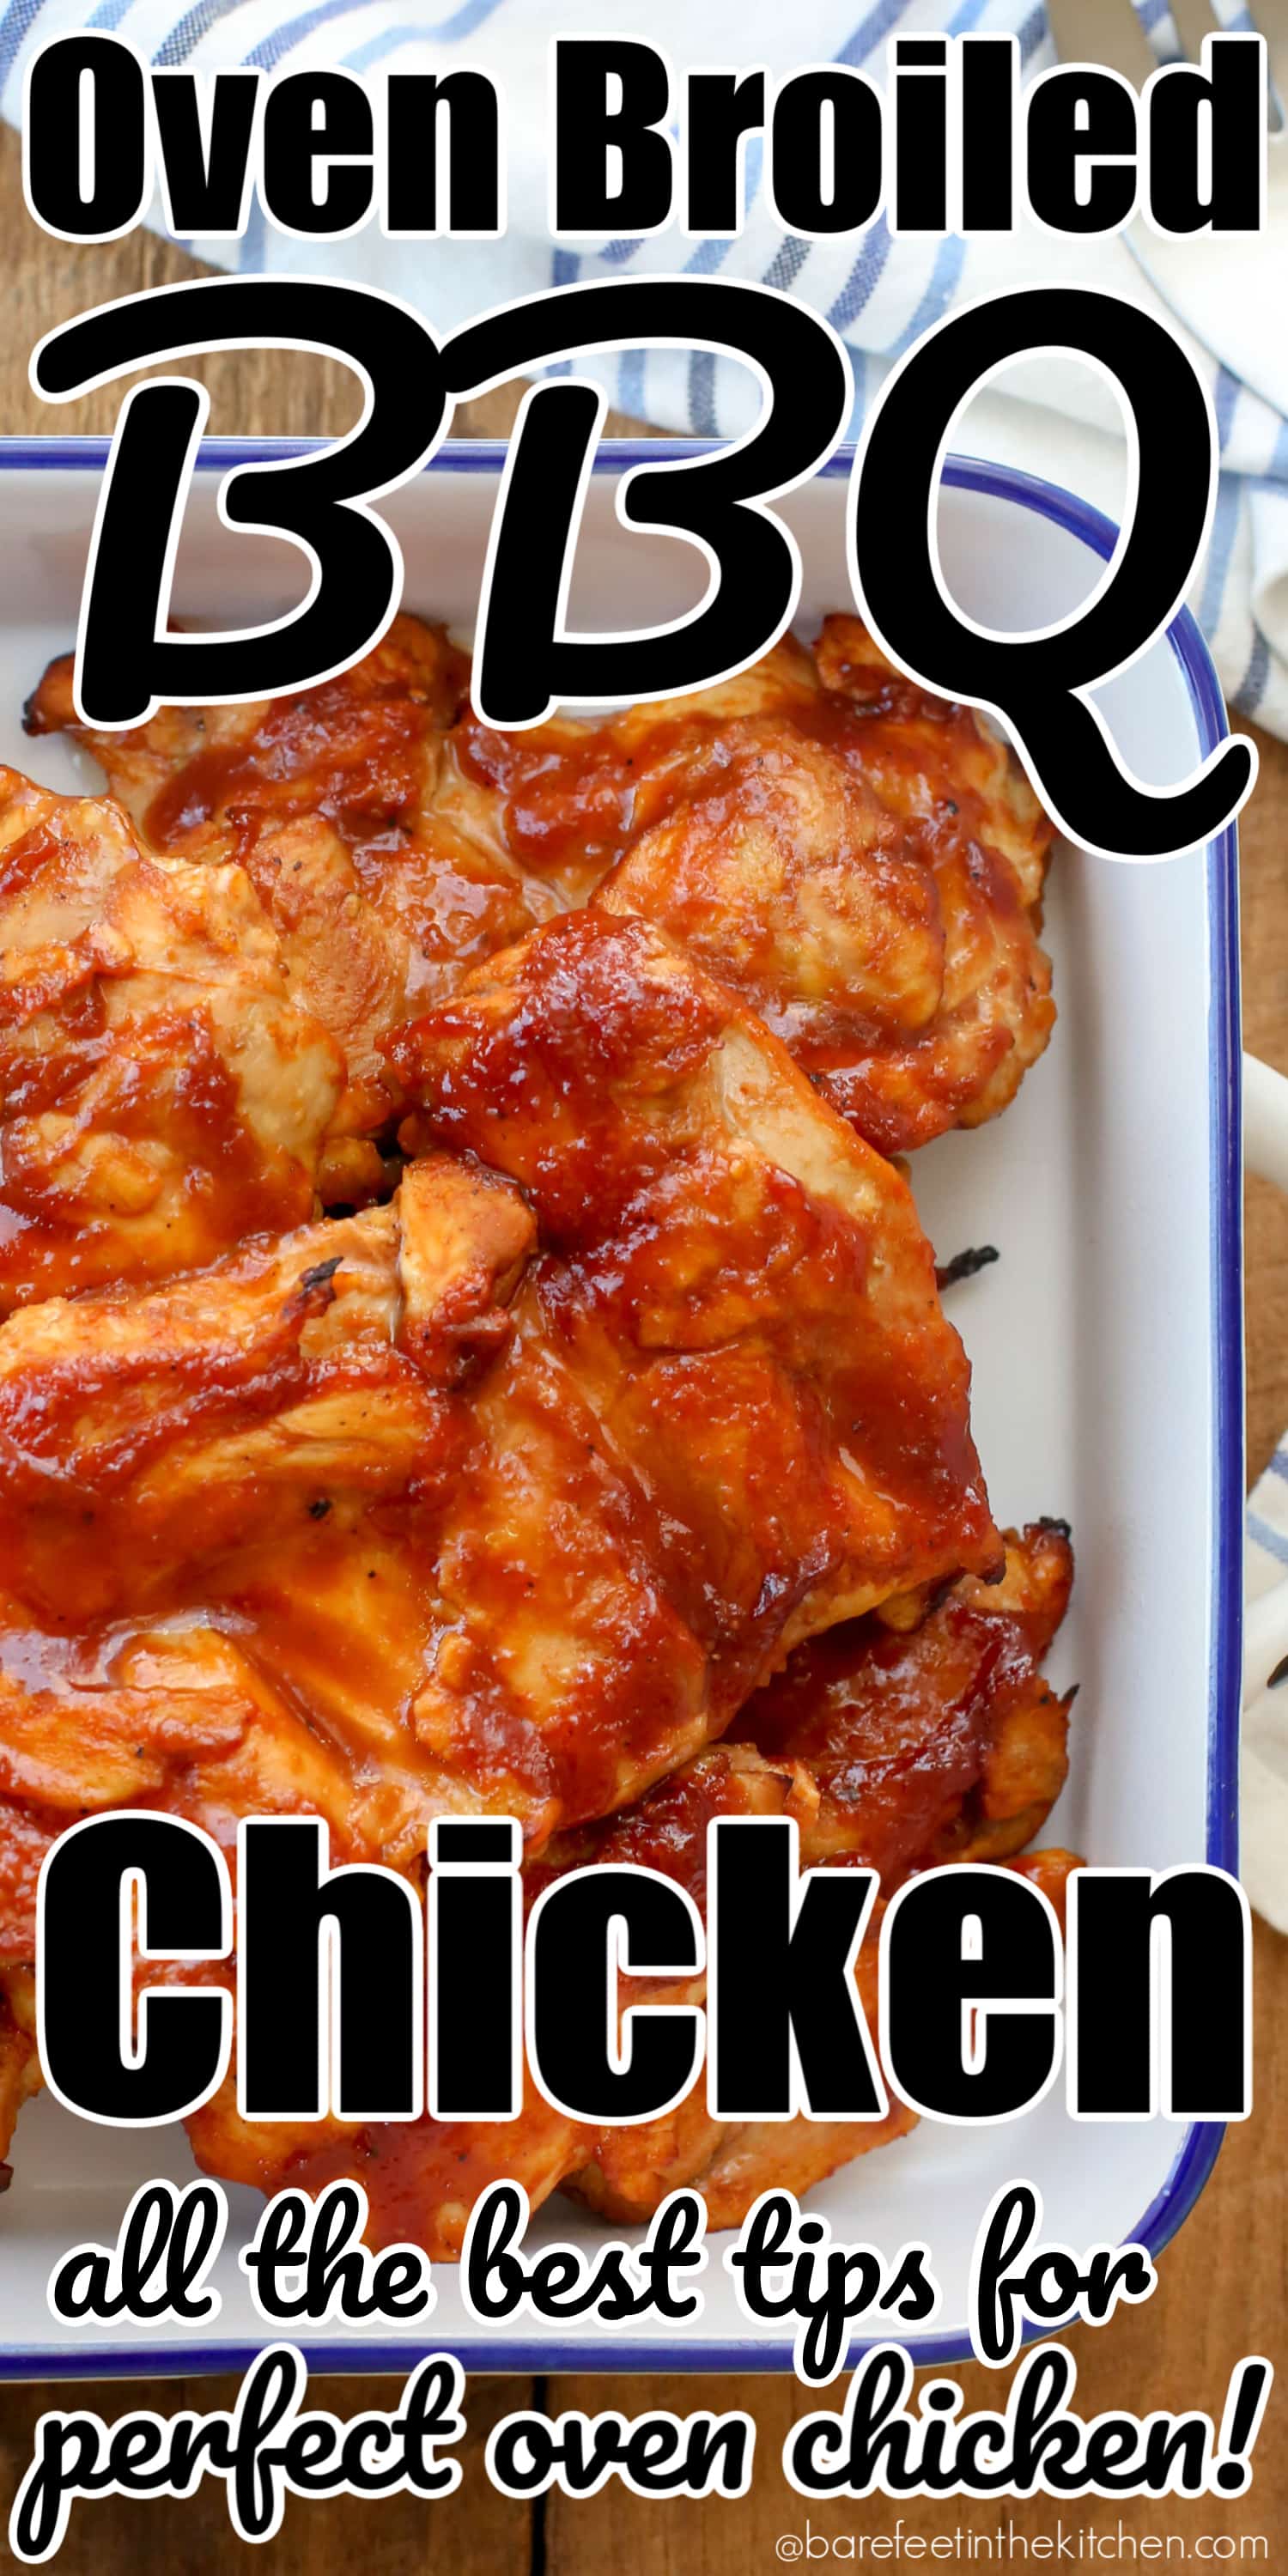 Oven Broiled Chicken is a go-to weeknight dinner in our house!